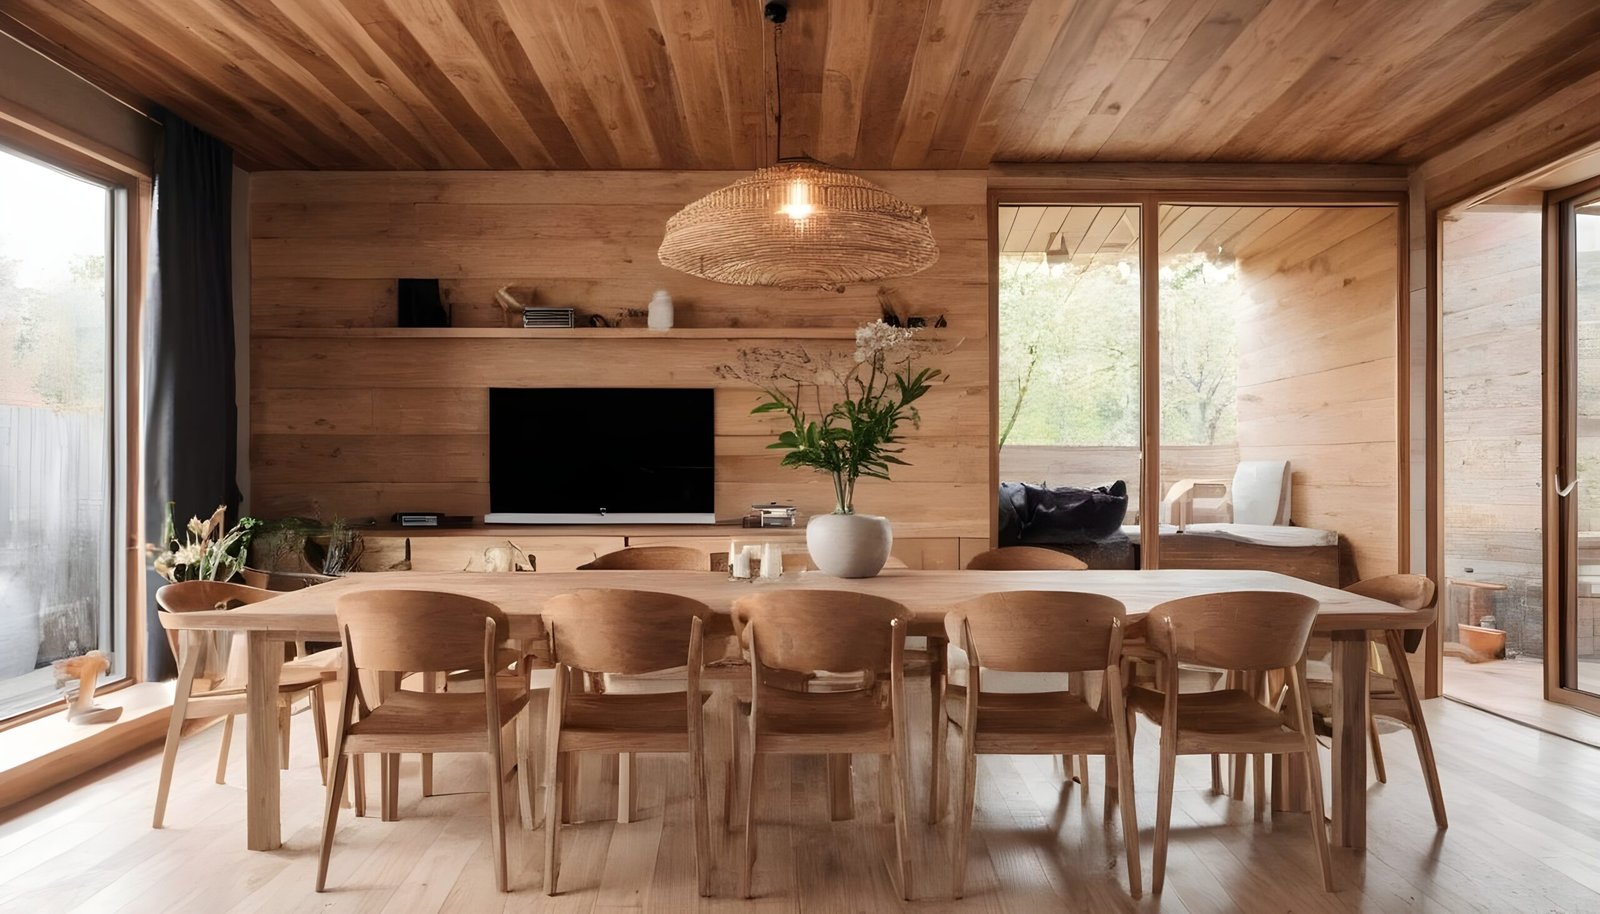 Dining room with lots of wooden details for a warm indoor outdoor feeling.